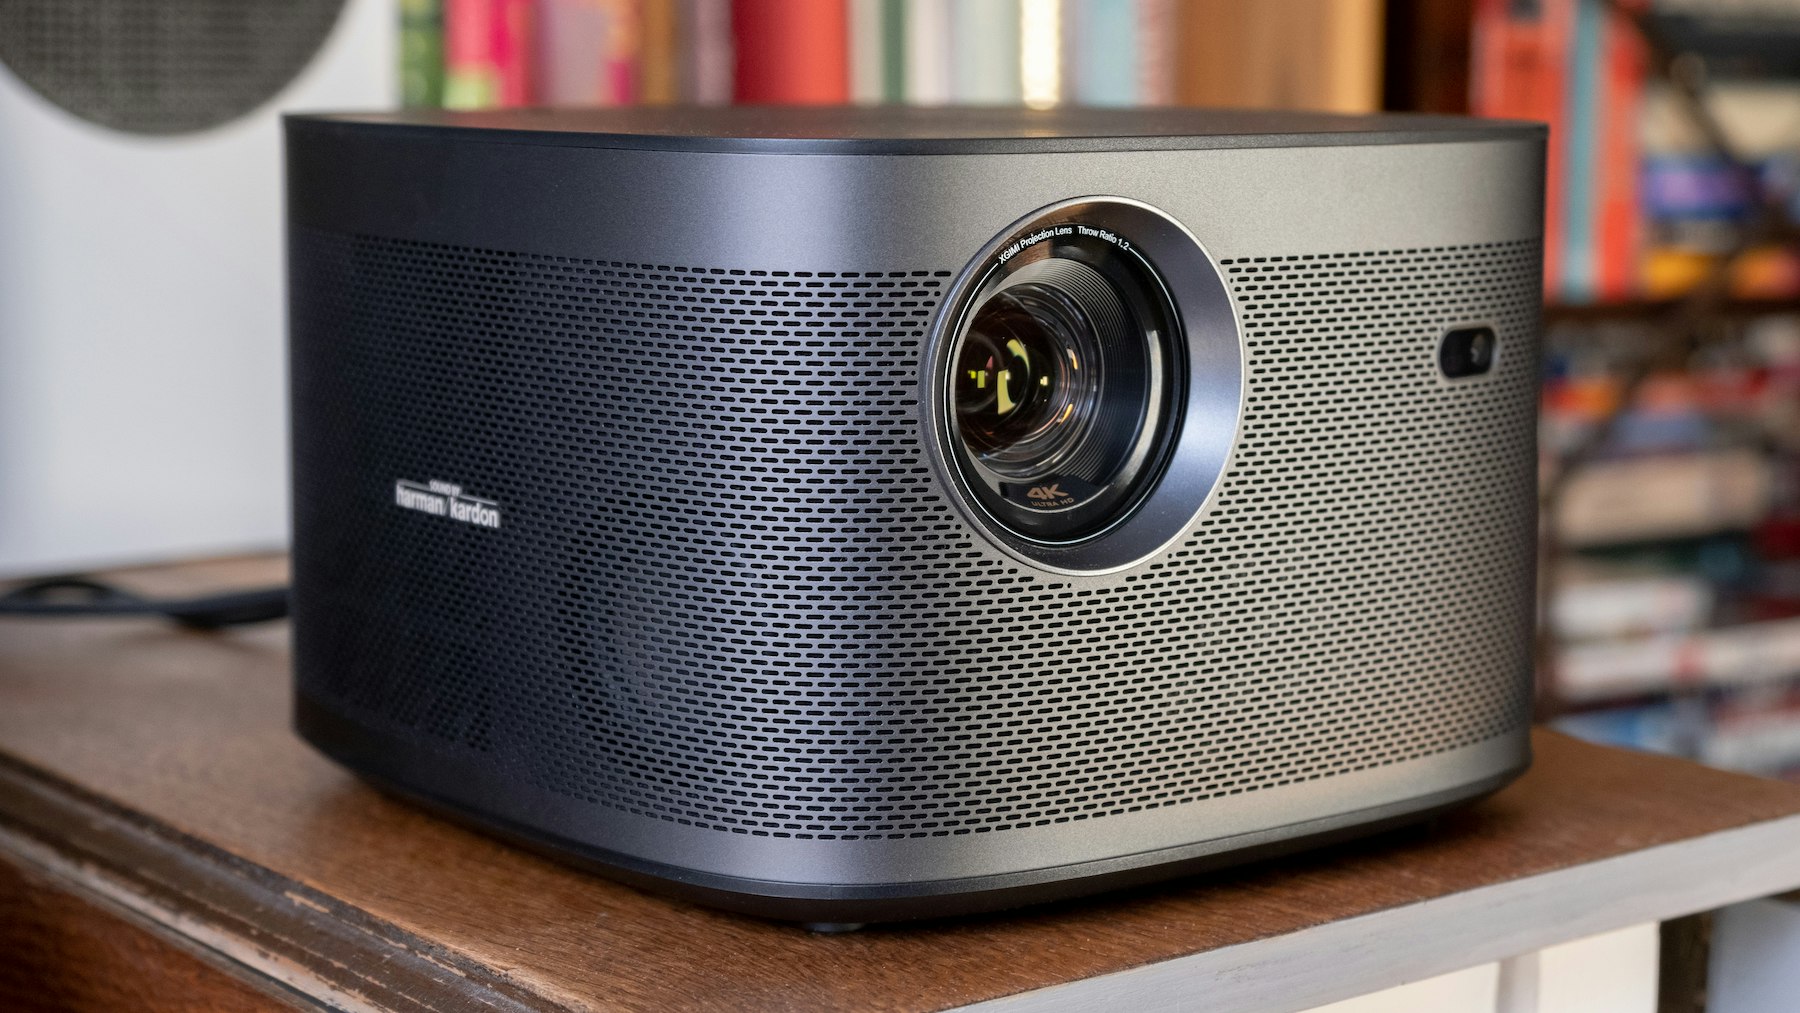 No need for a screen: XGIMI HORIZON Pro 4K Projector